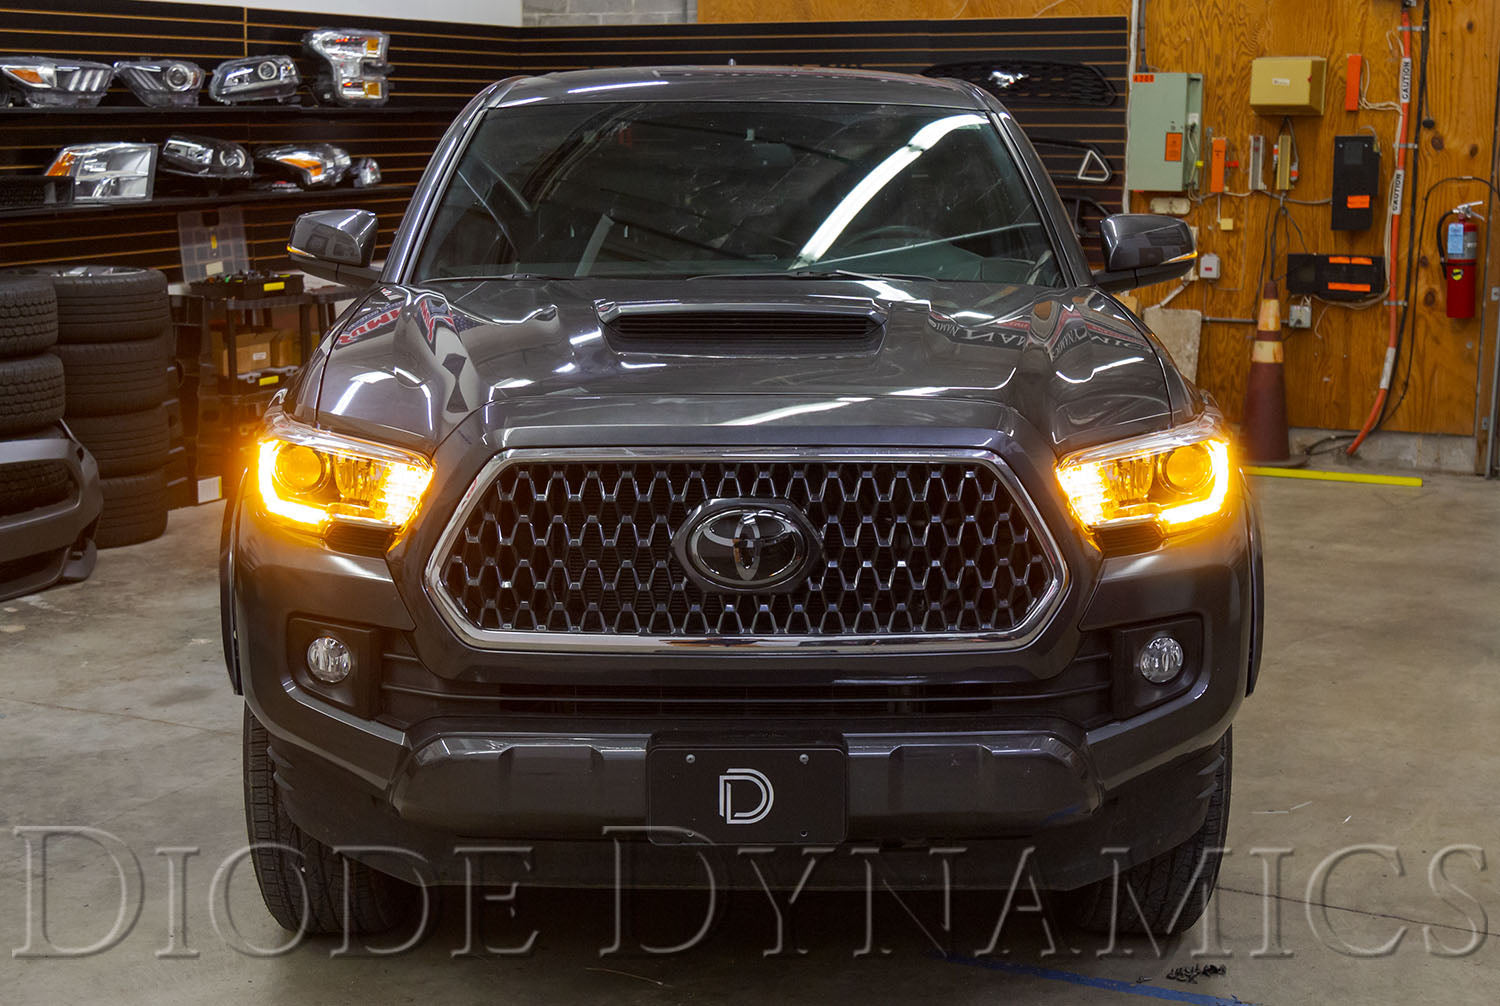 Tacoma 2016-2019 Pro-Series Amber DRL Boards Diode Dynamics